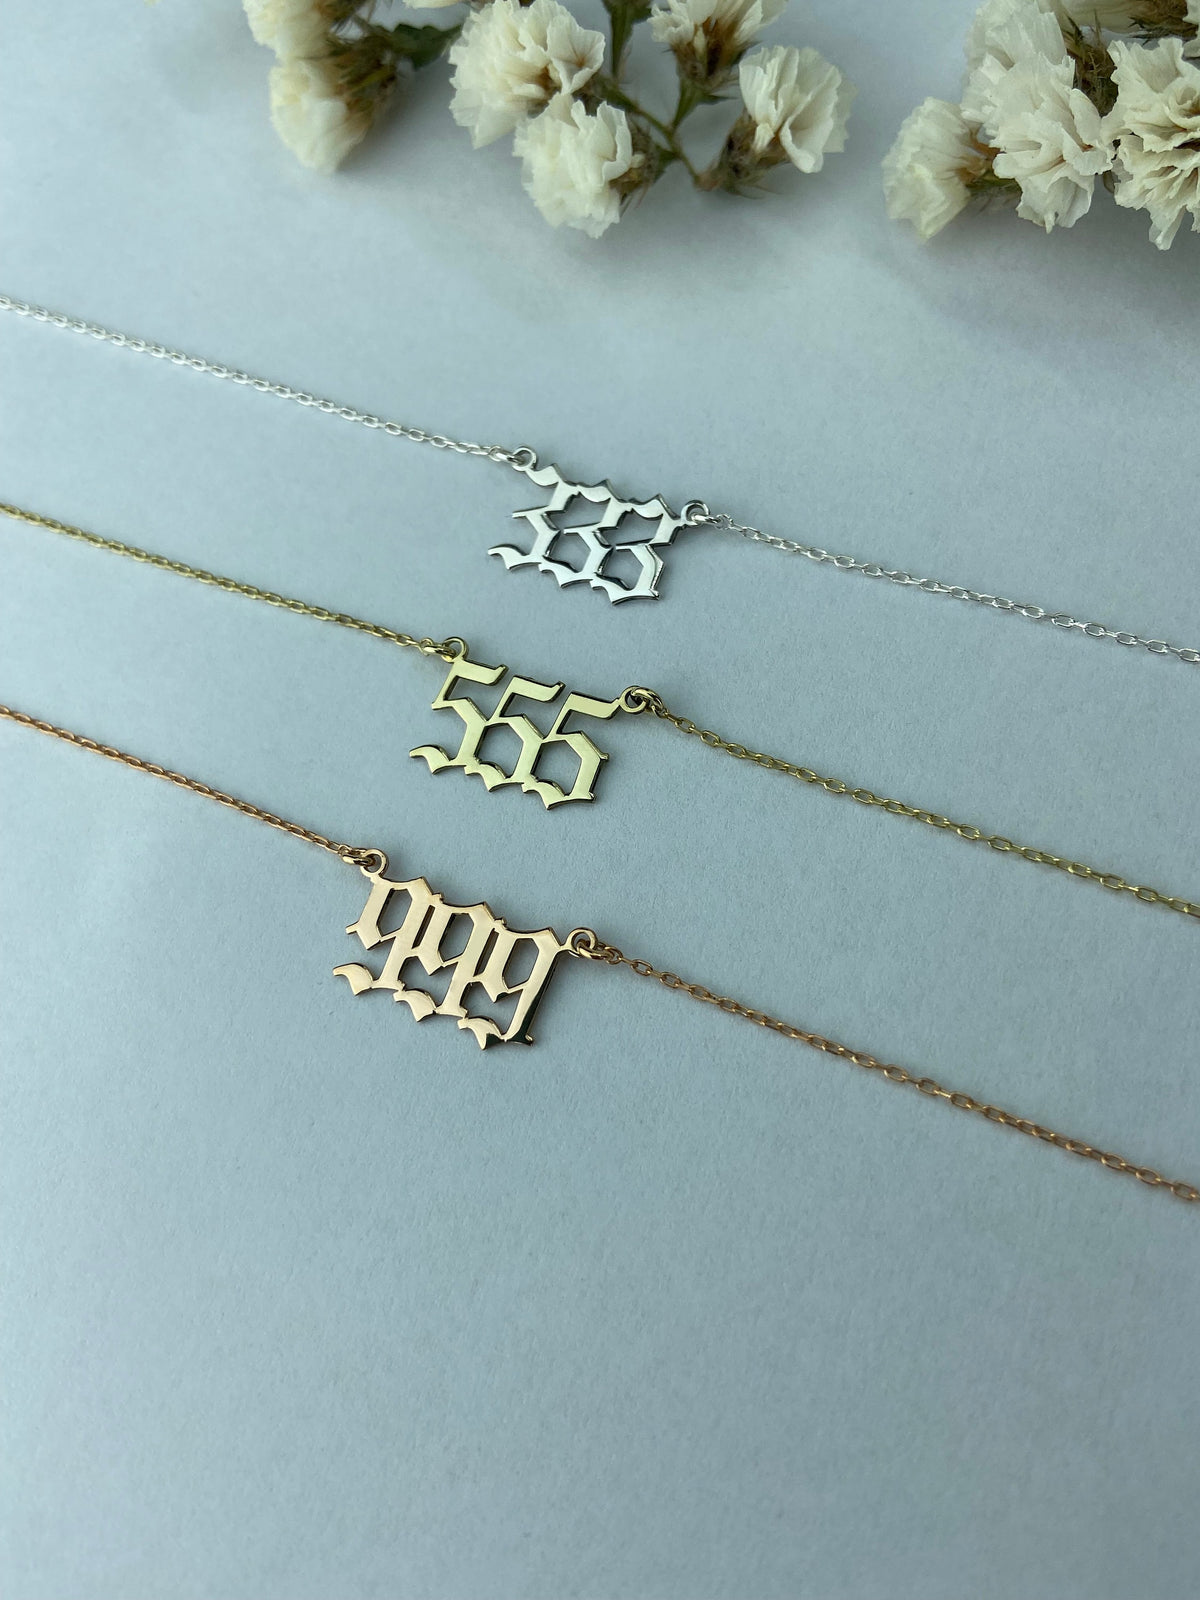 Dainty Sterling Silver Angel Number Necklace, Gold Lucky Number Necklace 111,222,333,444,555,666,777,888,999 | Tiny Birthday Gifts